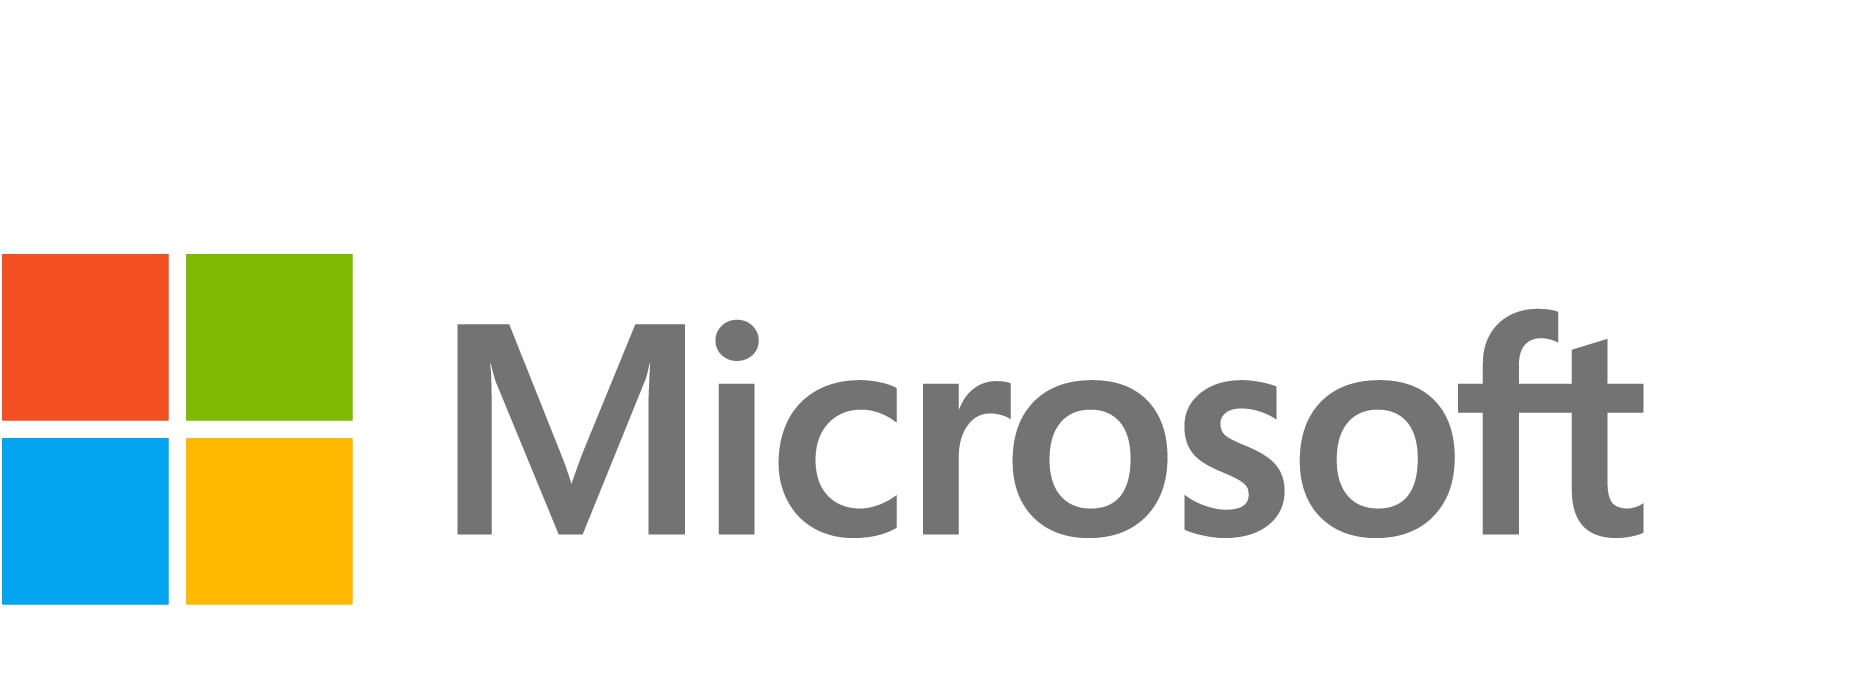 Microsoft Power Pages - subscription license (1 year) - 100 authenticated users per web site